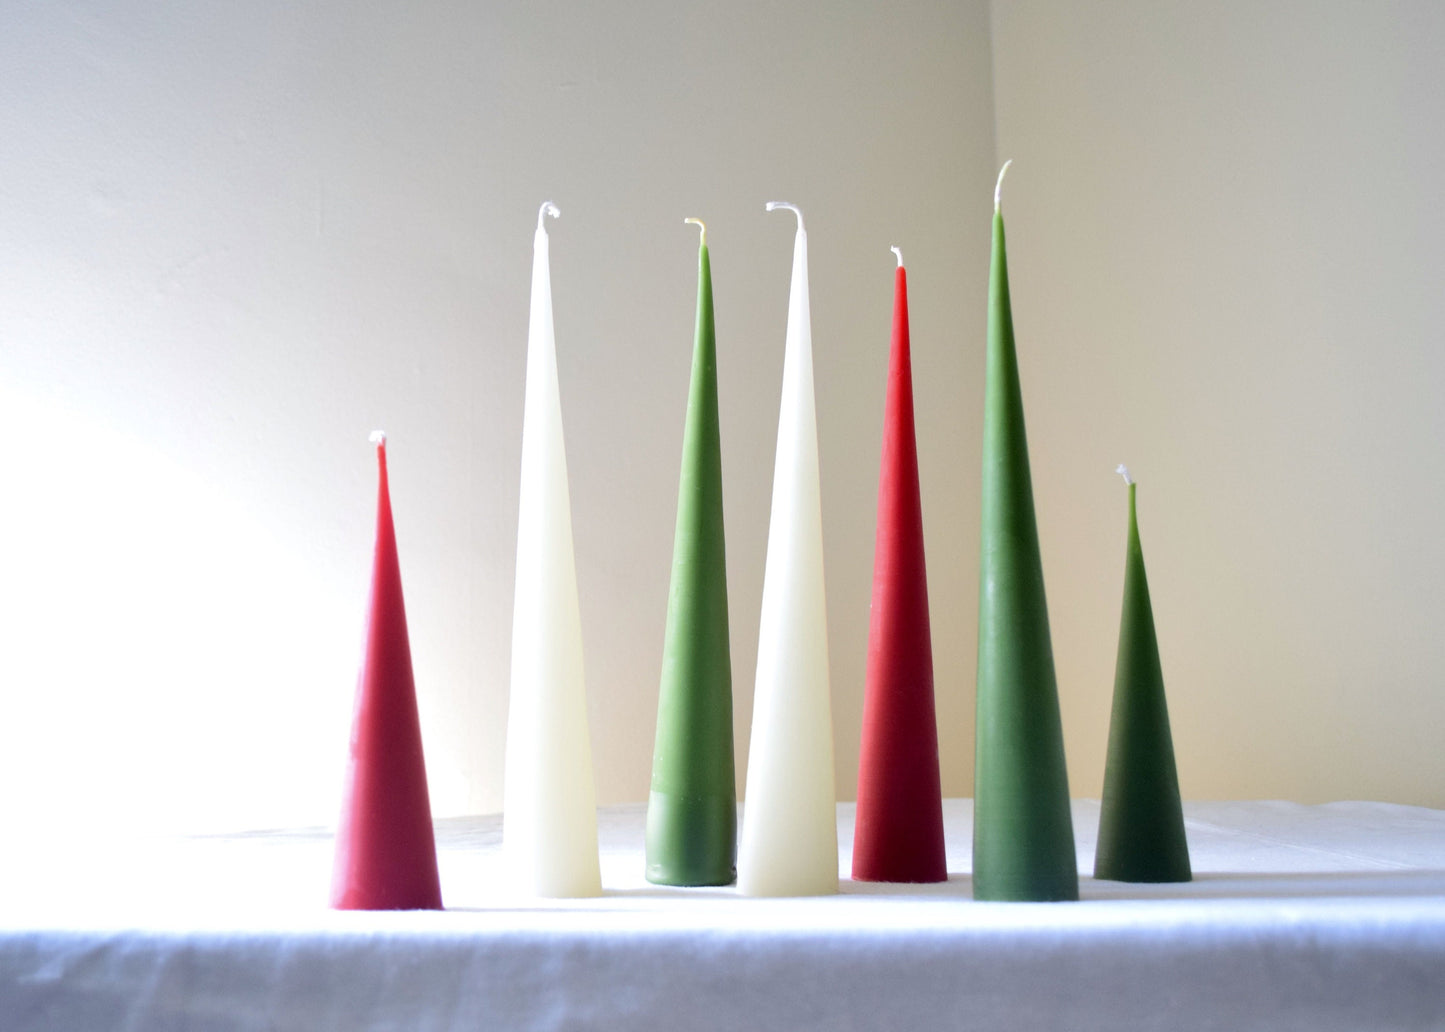 Christmas Candles - Beeswax Cone Candles // One Candle, Beeswax Candle, Candle, Beeswax, Modern Taper, Red White and Green